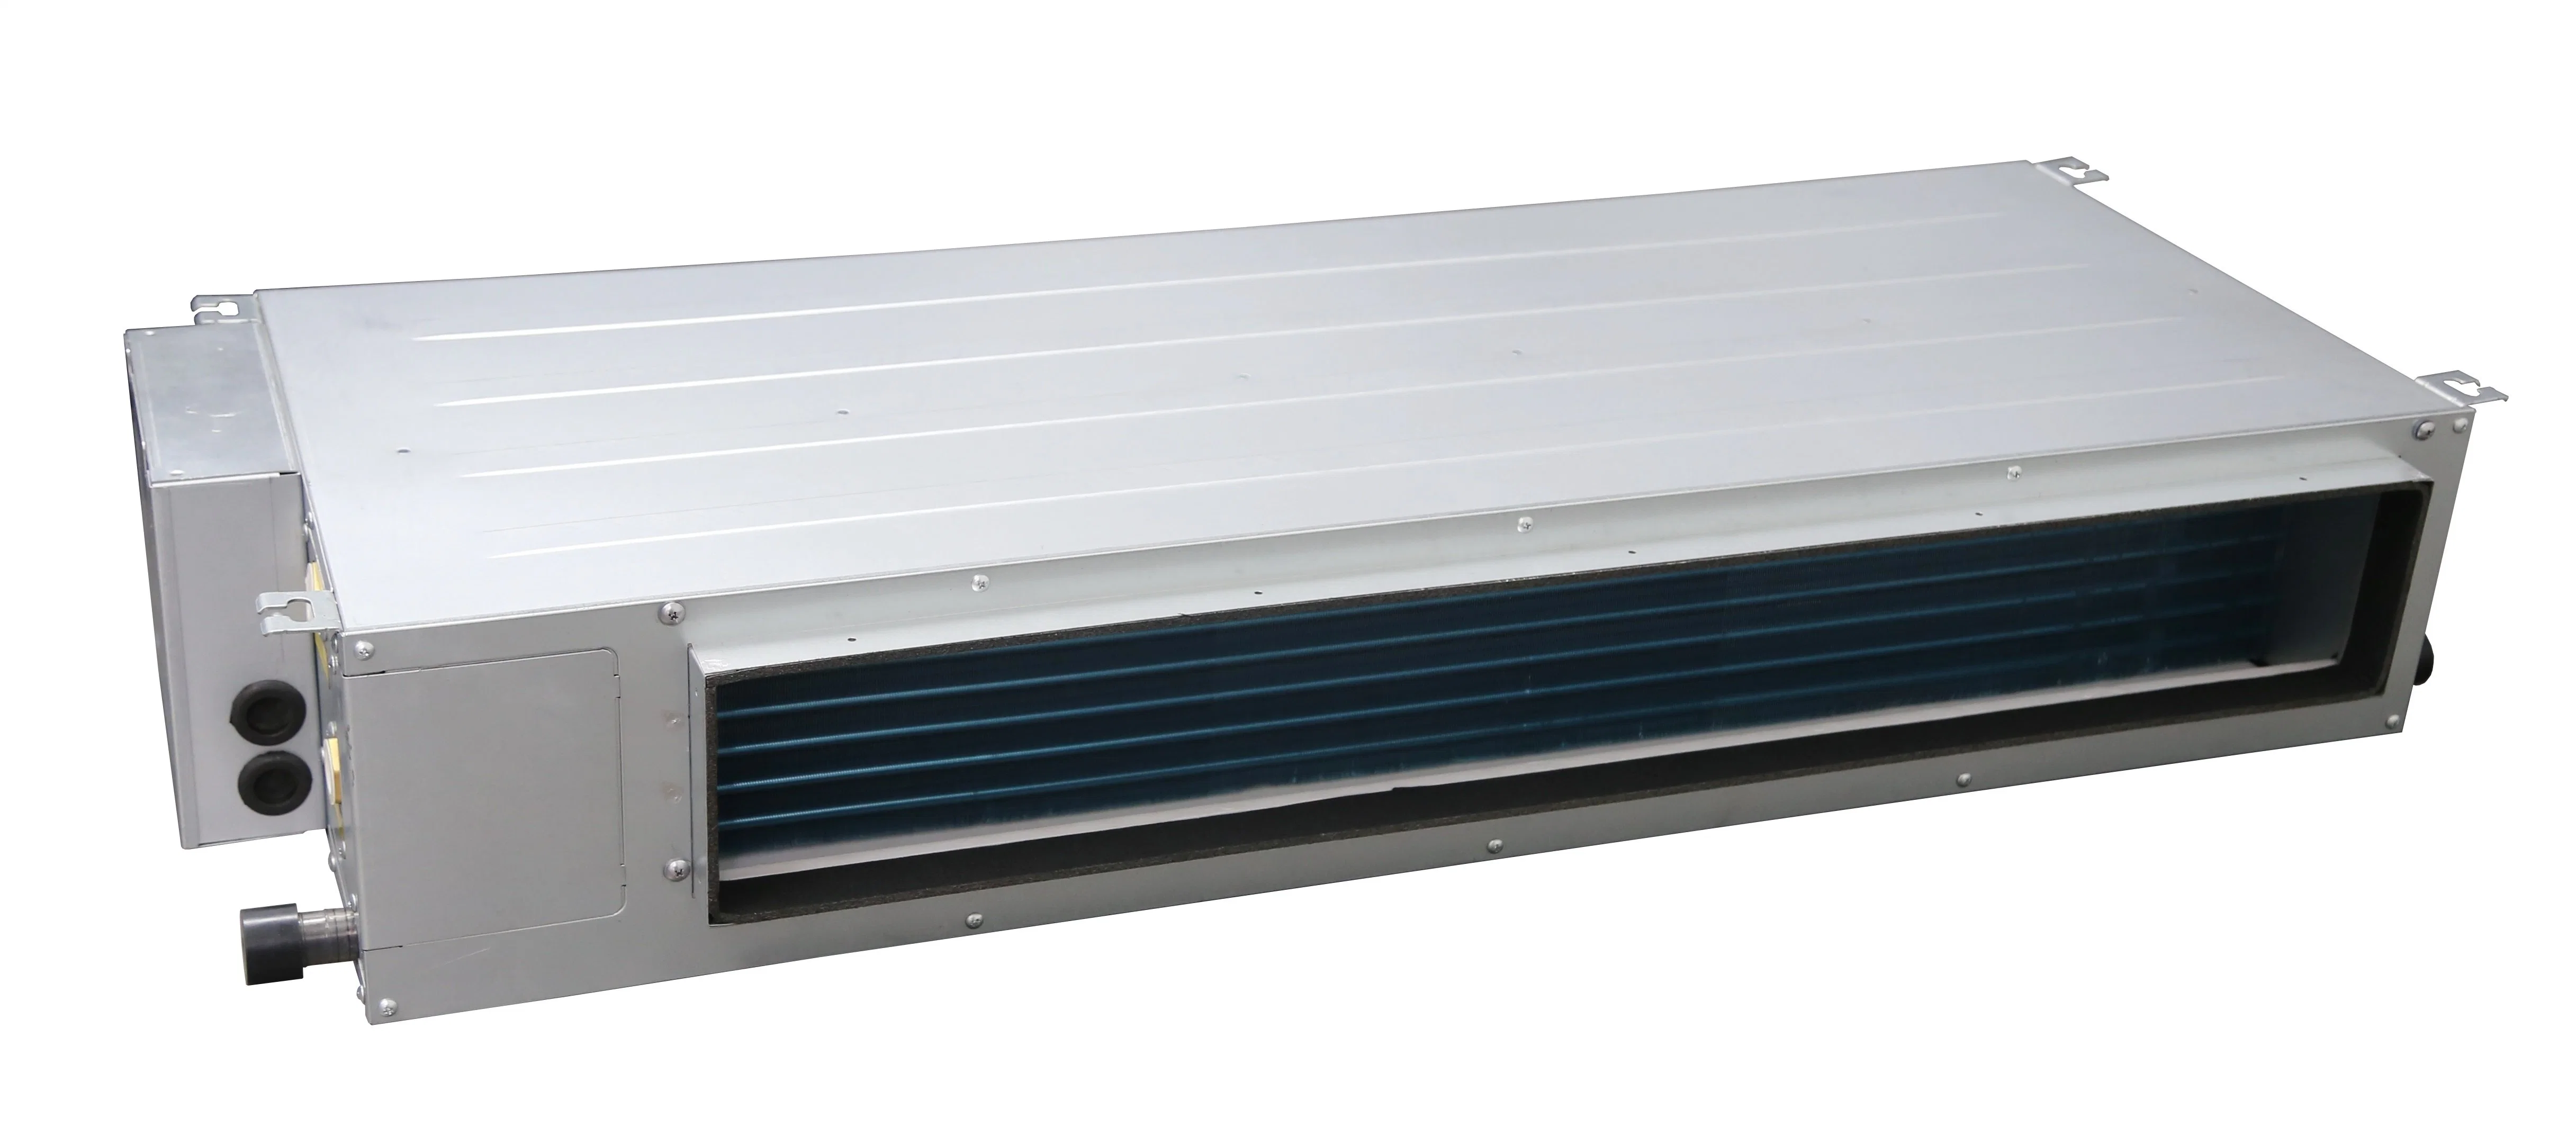 Cassette Fan Coil AC Commercial Air Conditioners Gree Air Conditioner for Hotel Villa Apartment